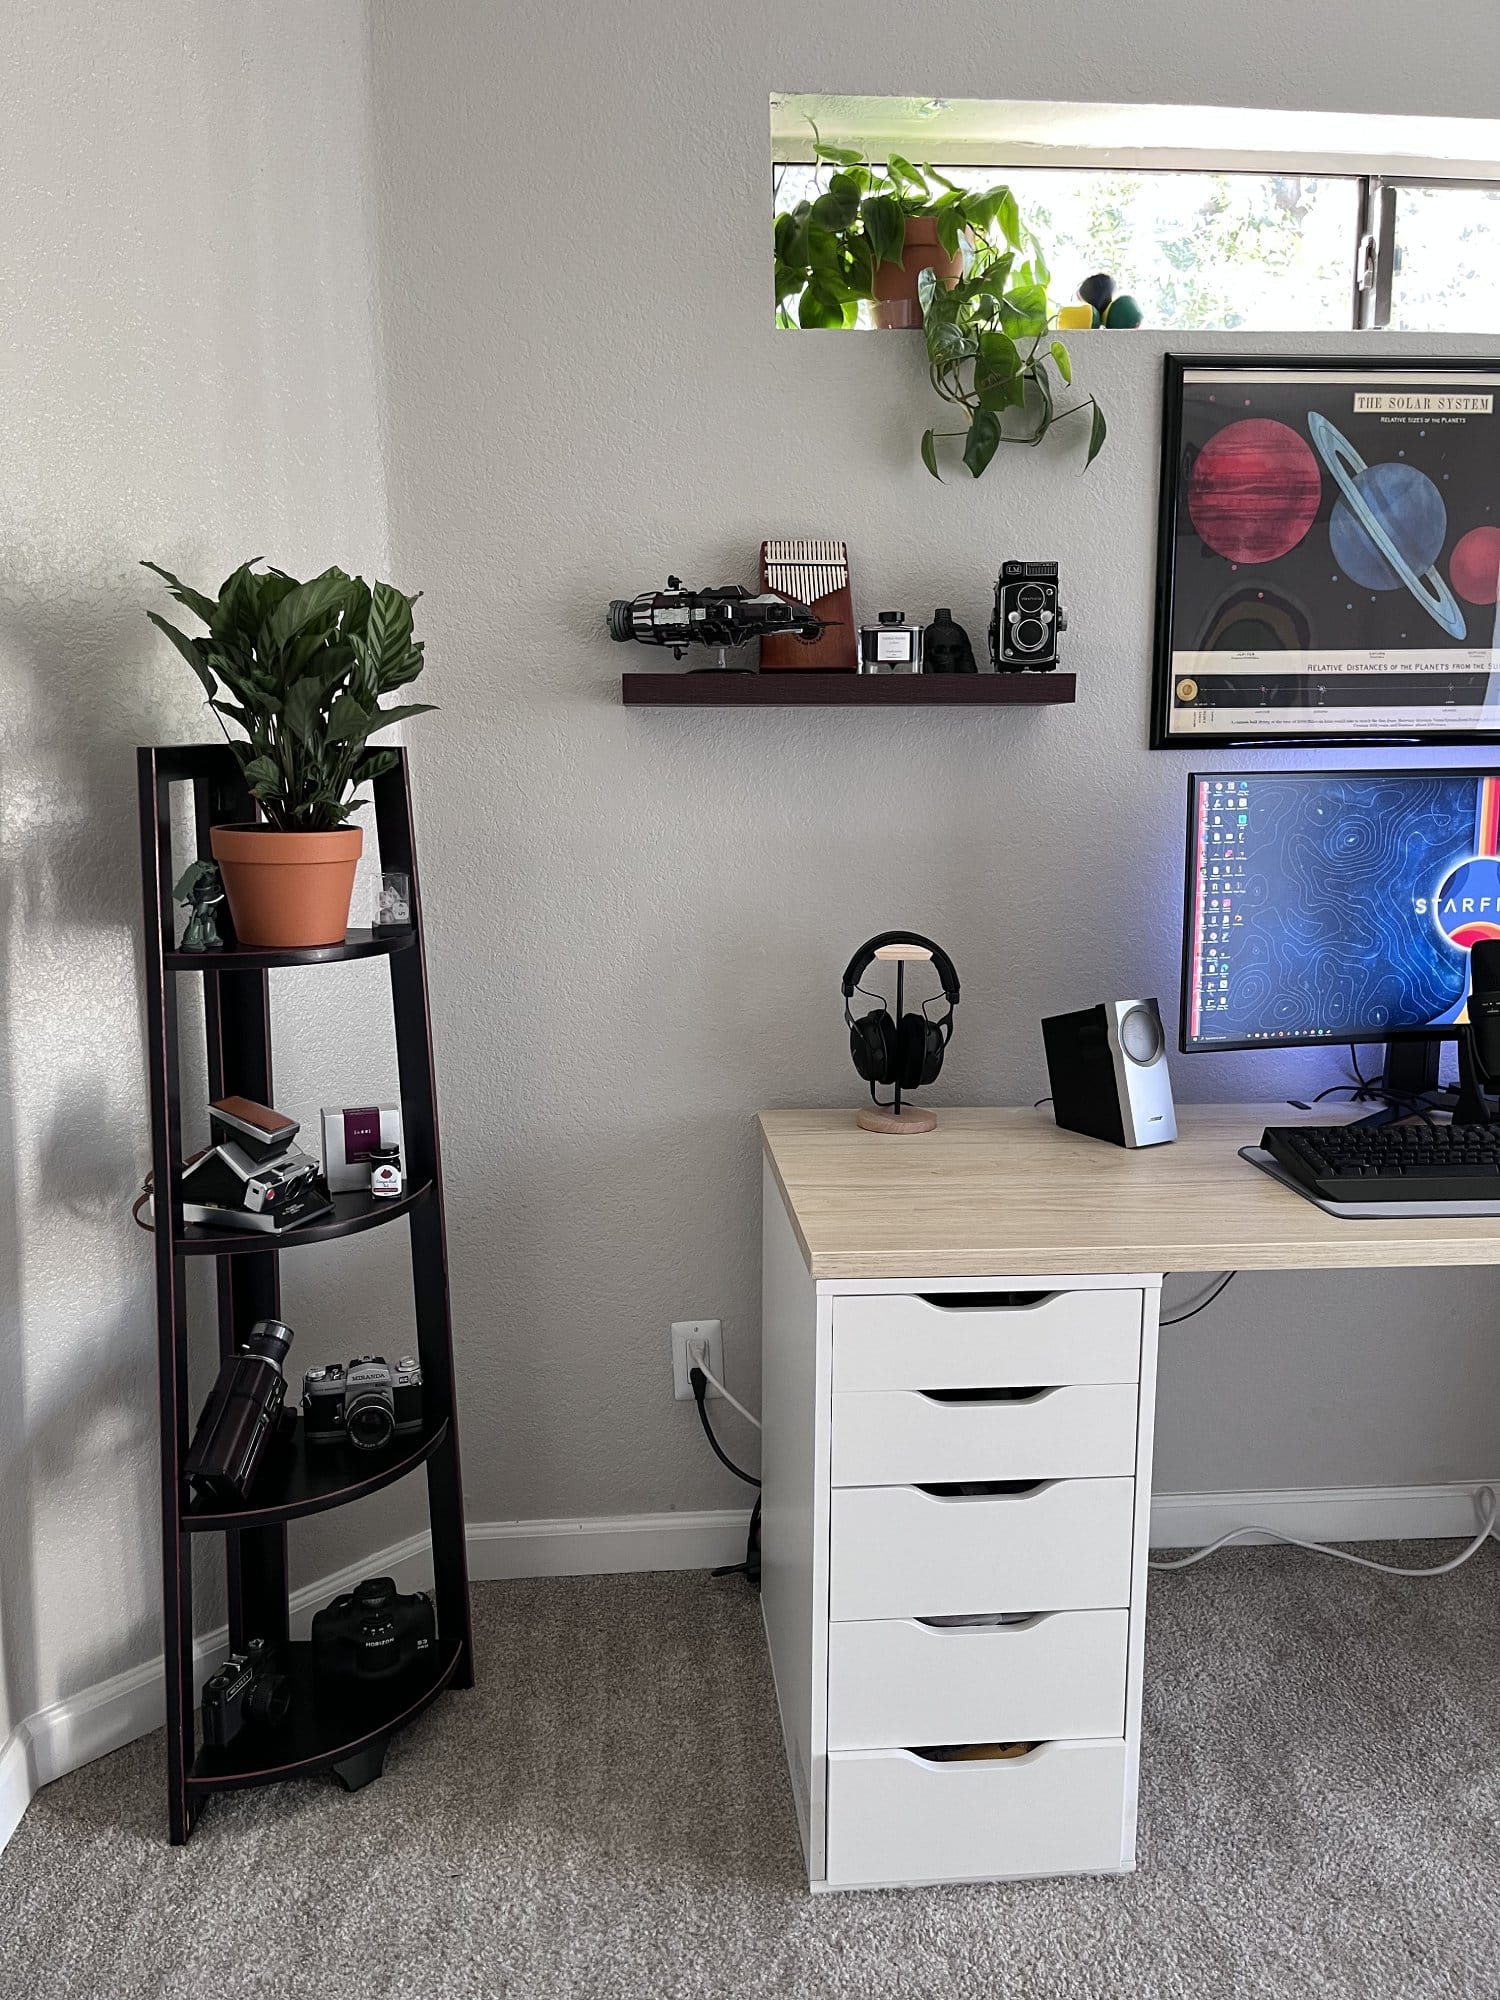 A well-organised work space with a white desk, ALEX drawers, a black shelf with plants and cameras, and a computer setup in the background